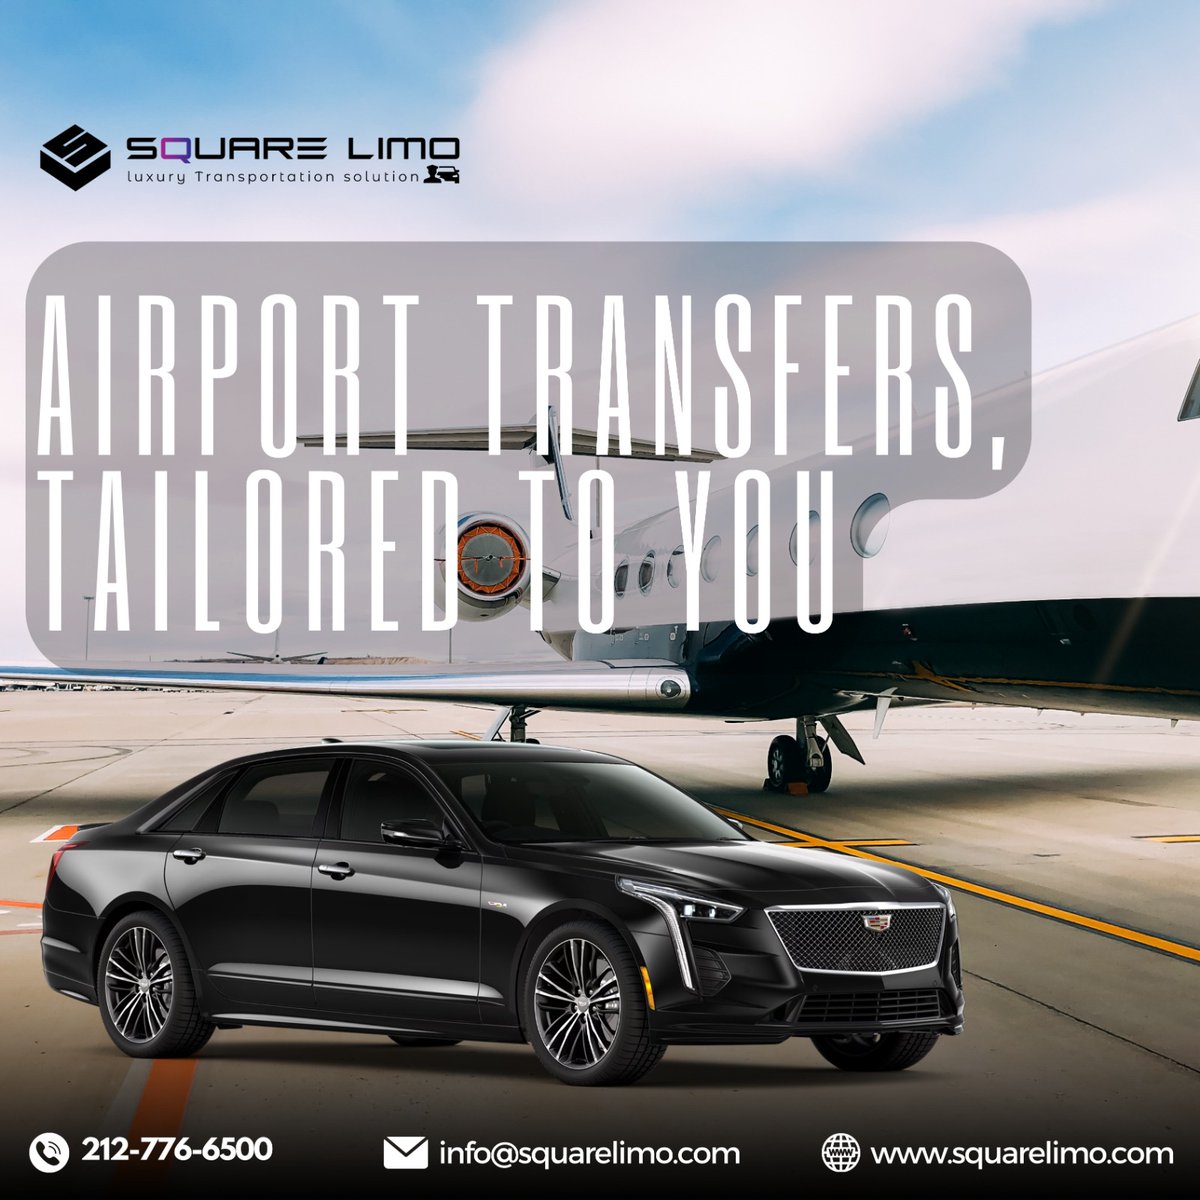 ✈️ Your Gateway to Luxury Travel in NYC! 🌟 Choose Square Limo for seamless airport transfers across JFK, LaGuardia, Downtown, and beyond! Book now and let us elevate your journey! 🗽🎉 #SquareLimo #NYCTravel #AirportTransfers 🚗✨